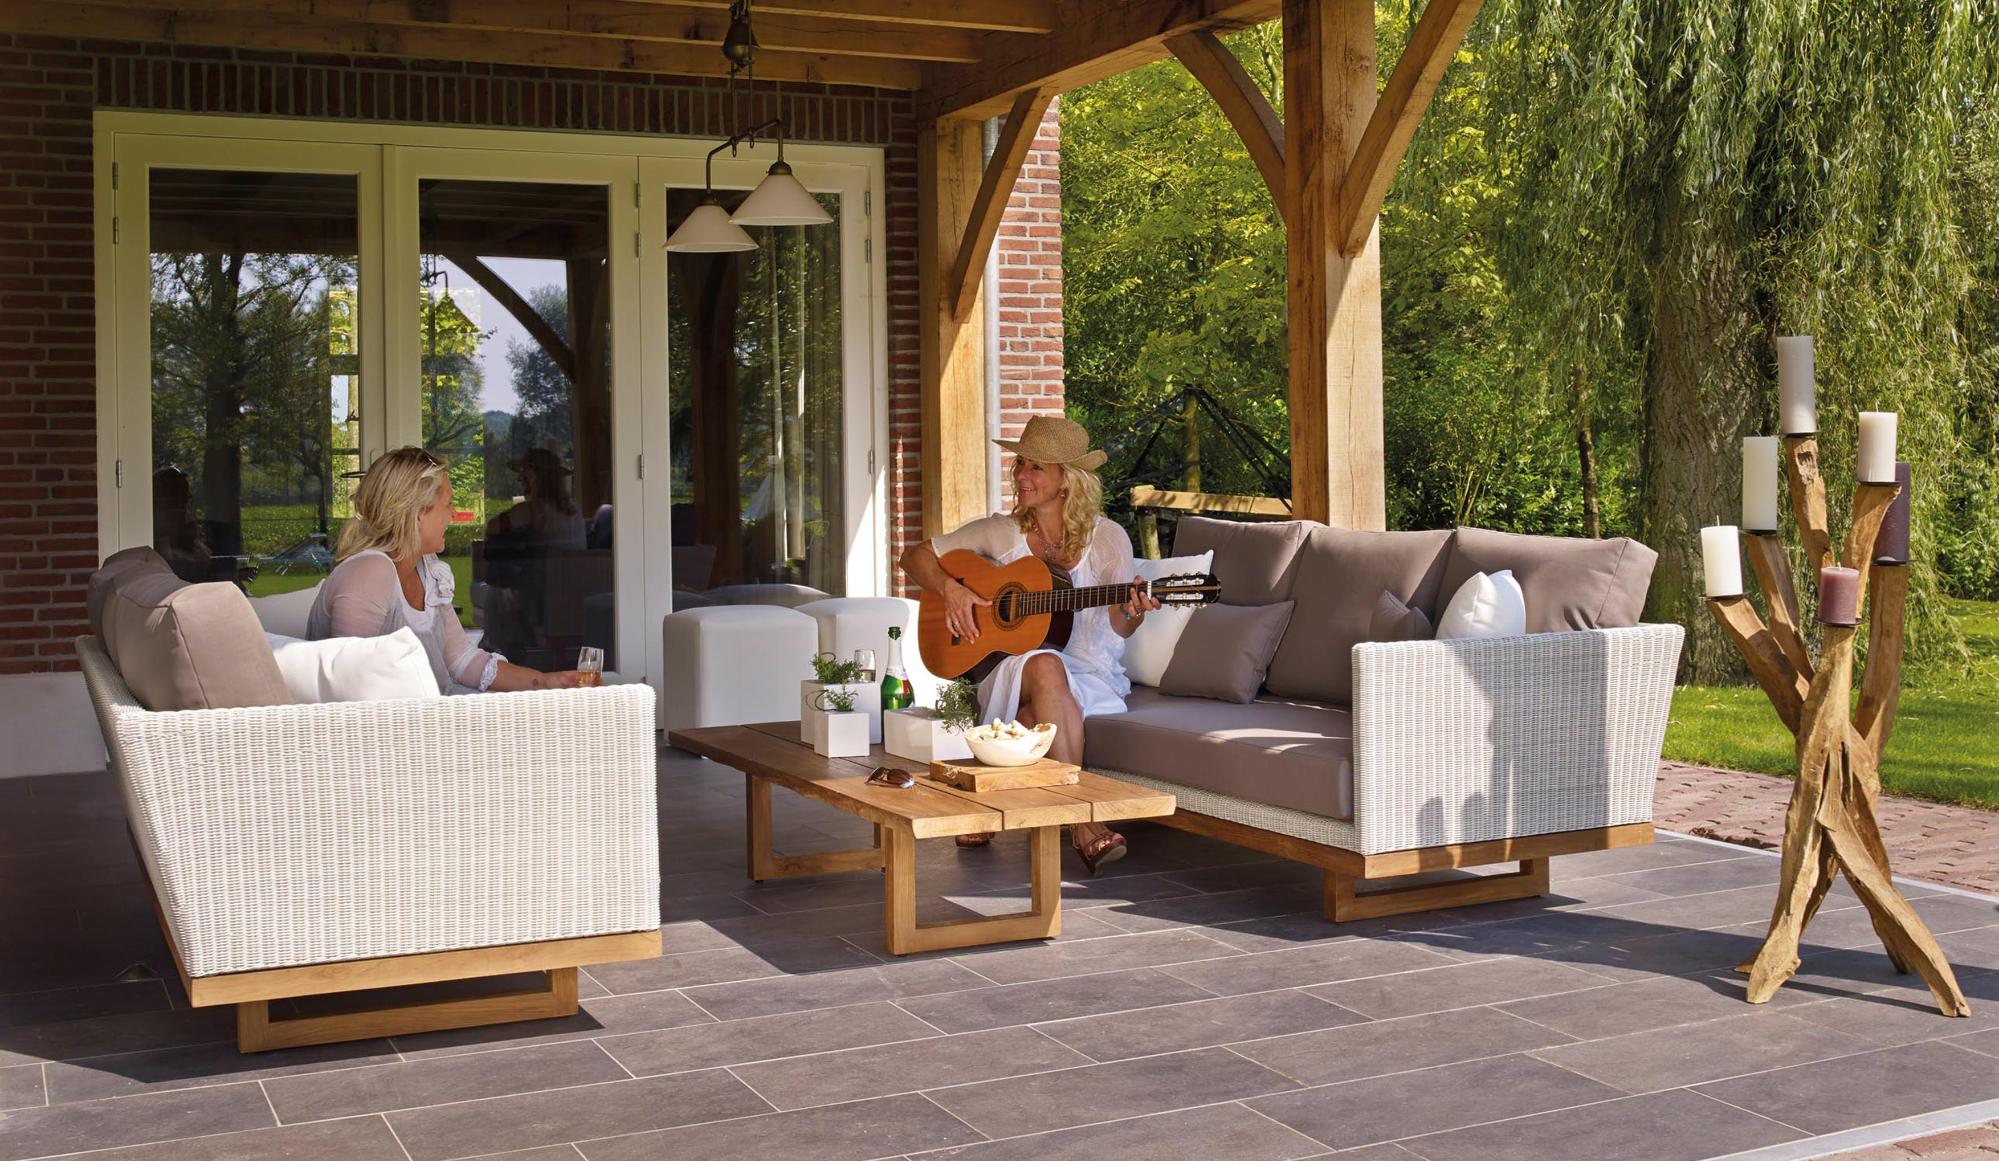 Setting up the Perfect Outdoor Living Space